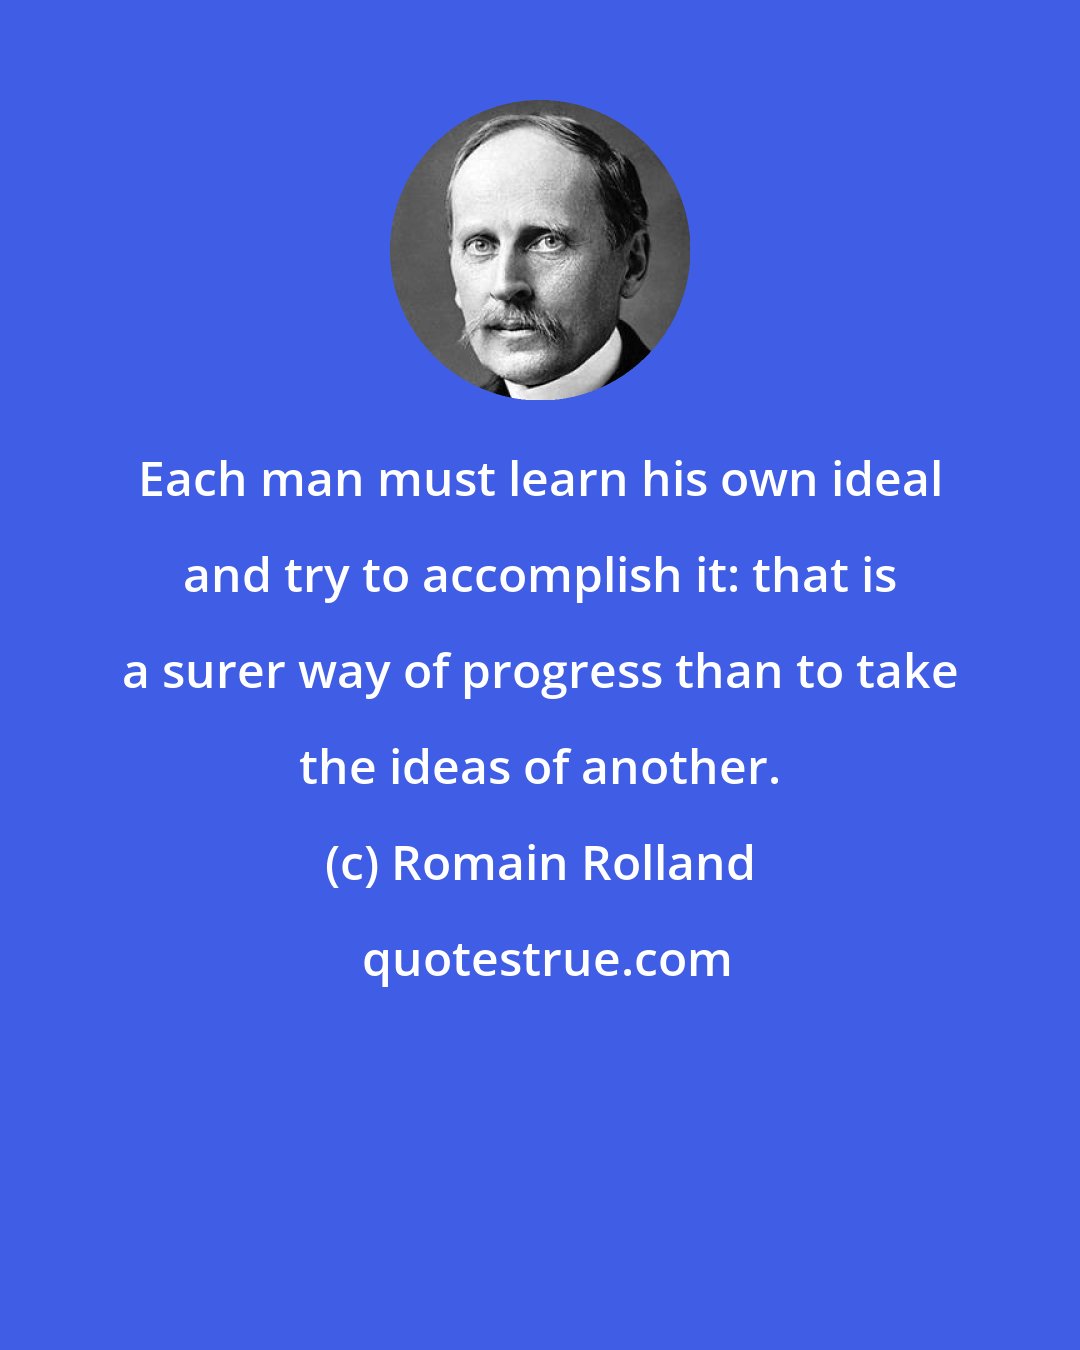 Romain Rolland: Each man must learn his own ideal and try to accomplish it: that is a surer way of progress than to take the ideas of another.